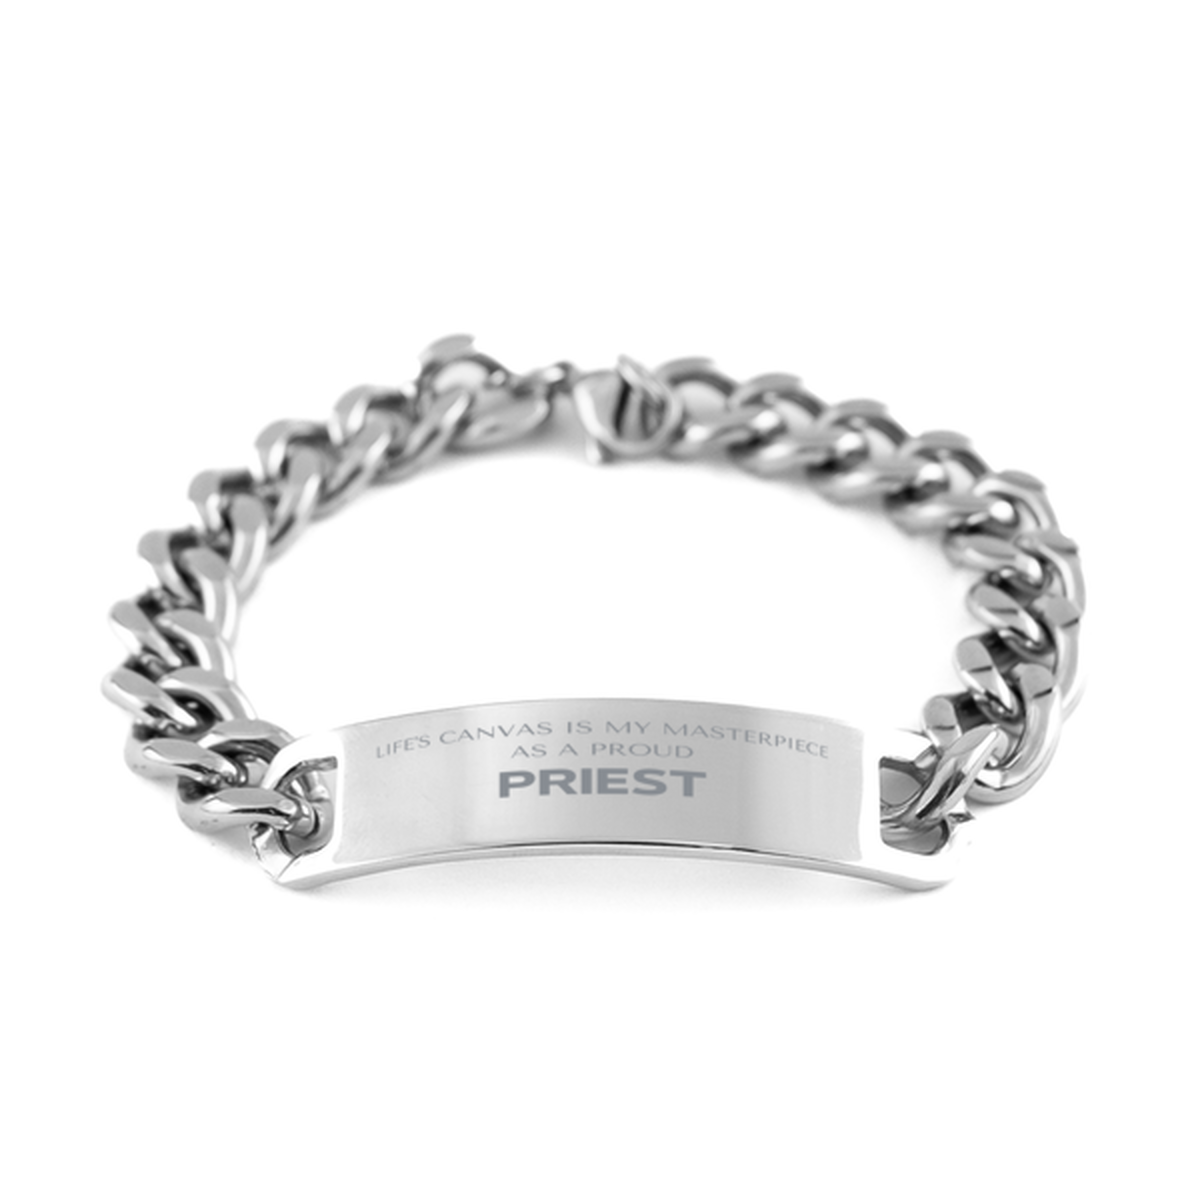 Proud Priest Gifts, Life's canvas is my masterpiece, Epic Birthday Christmas Unique Cuban Chain Stainless Steel Bracelet For Priest, Coworkers, Men, Women, Friends